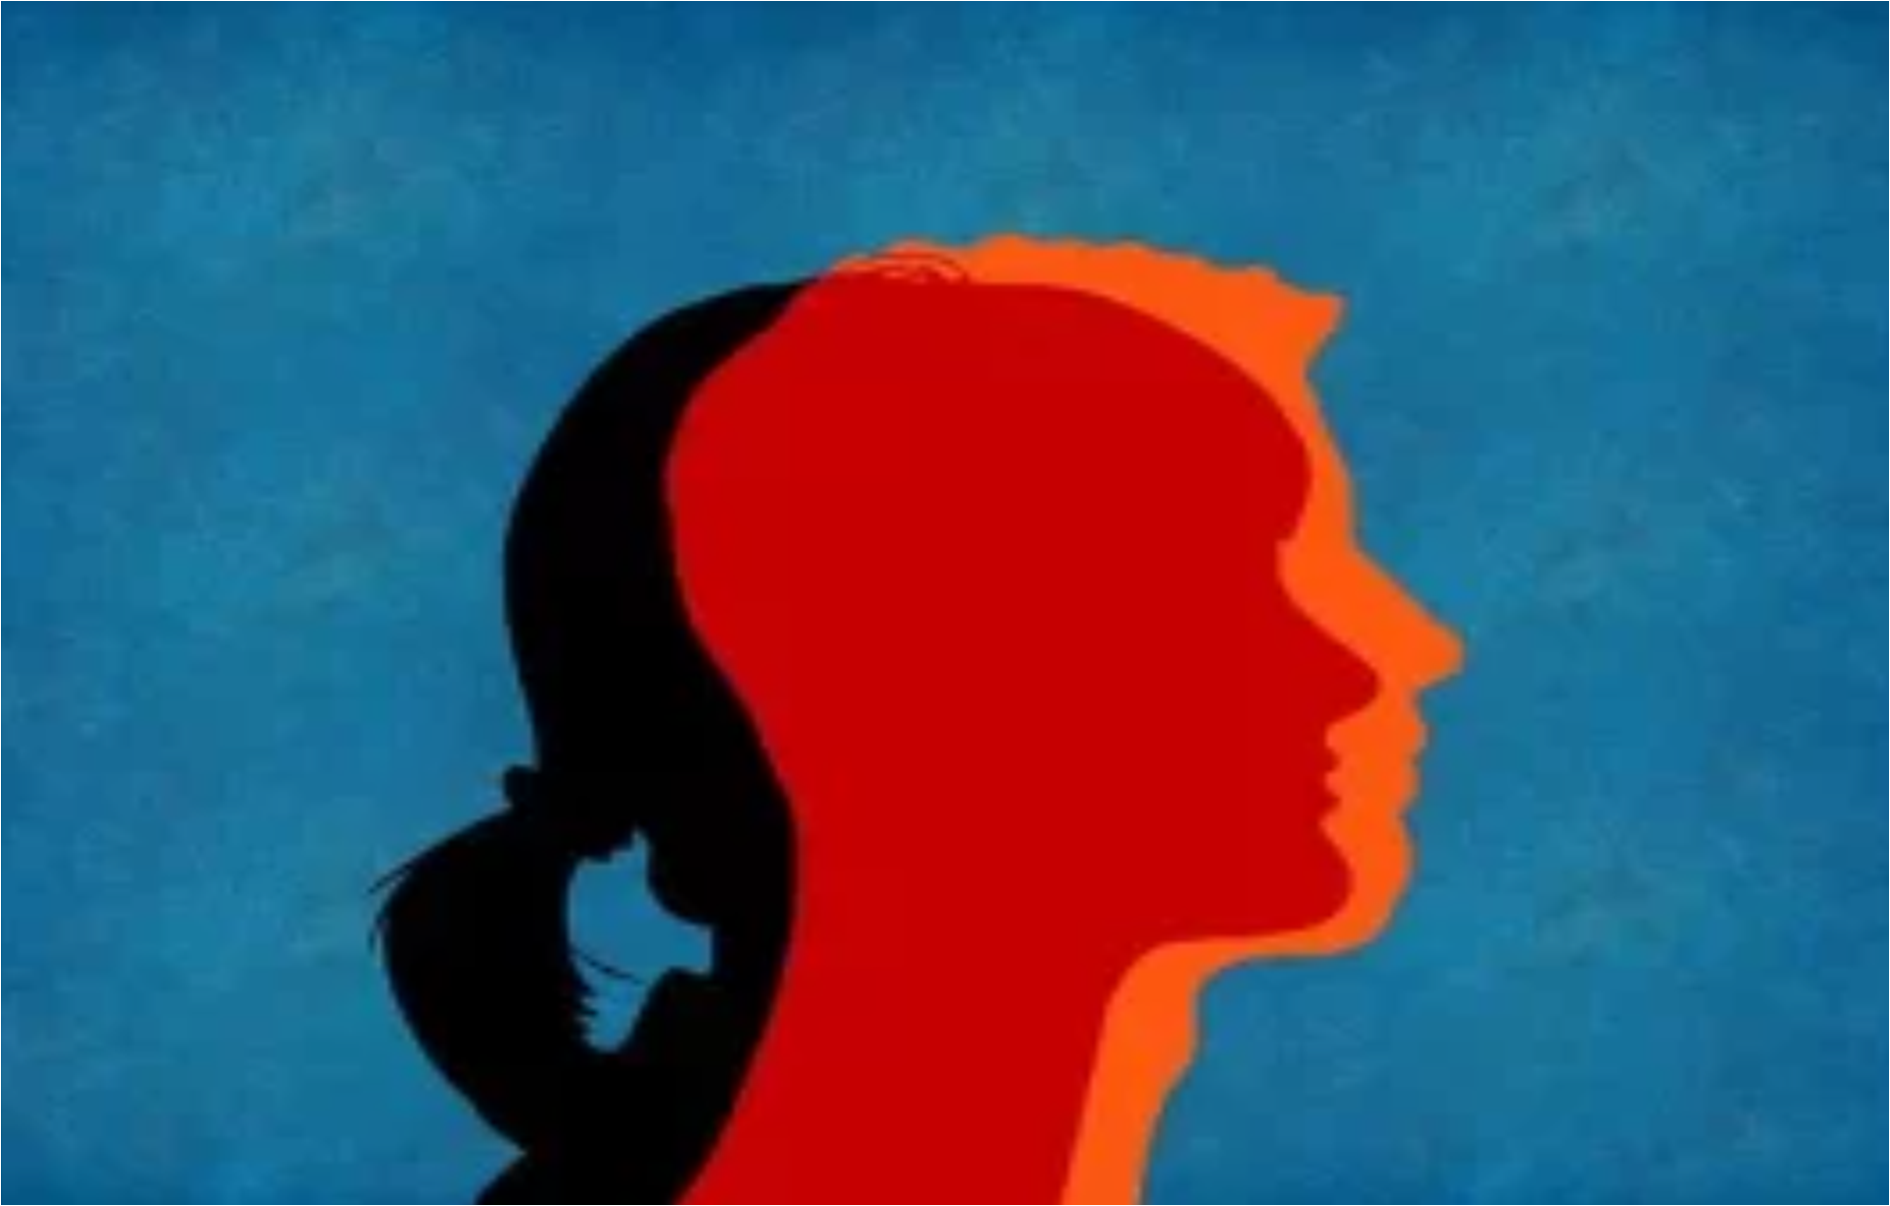 cartoon silhouette profiles of a man and woman